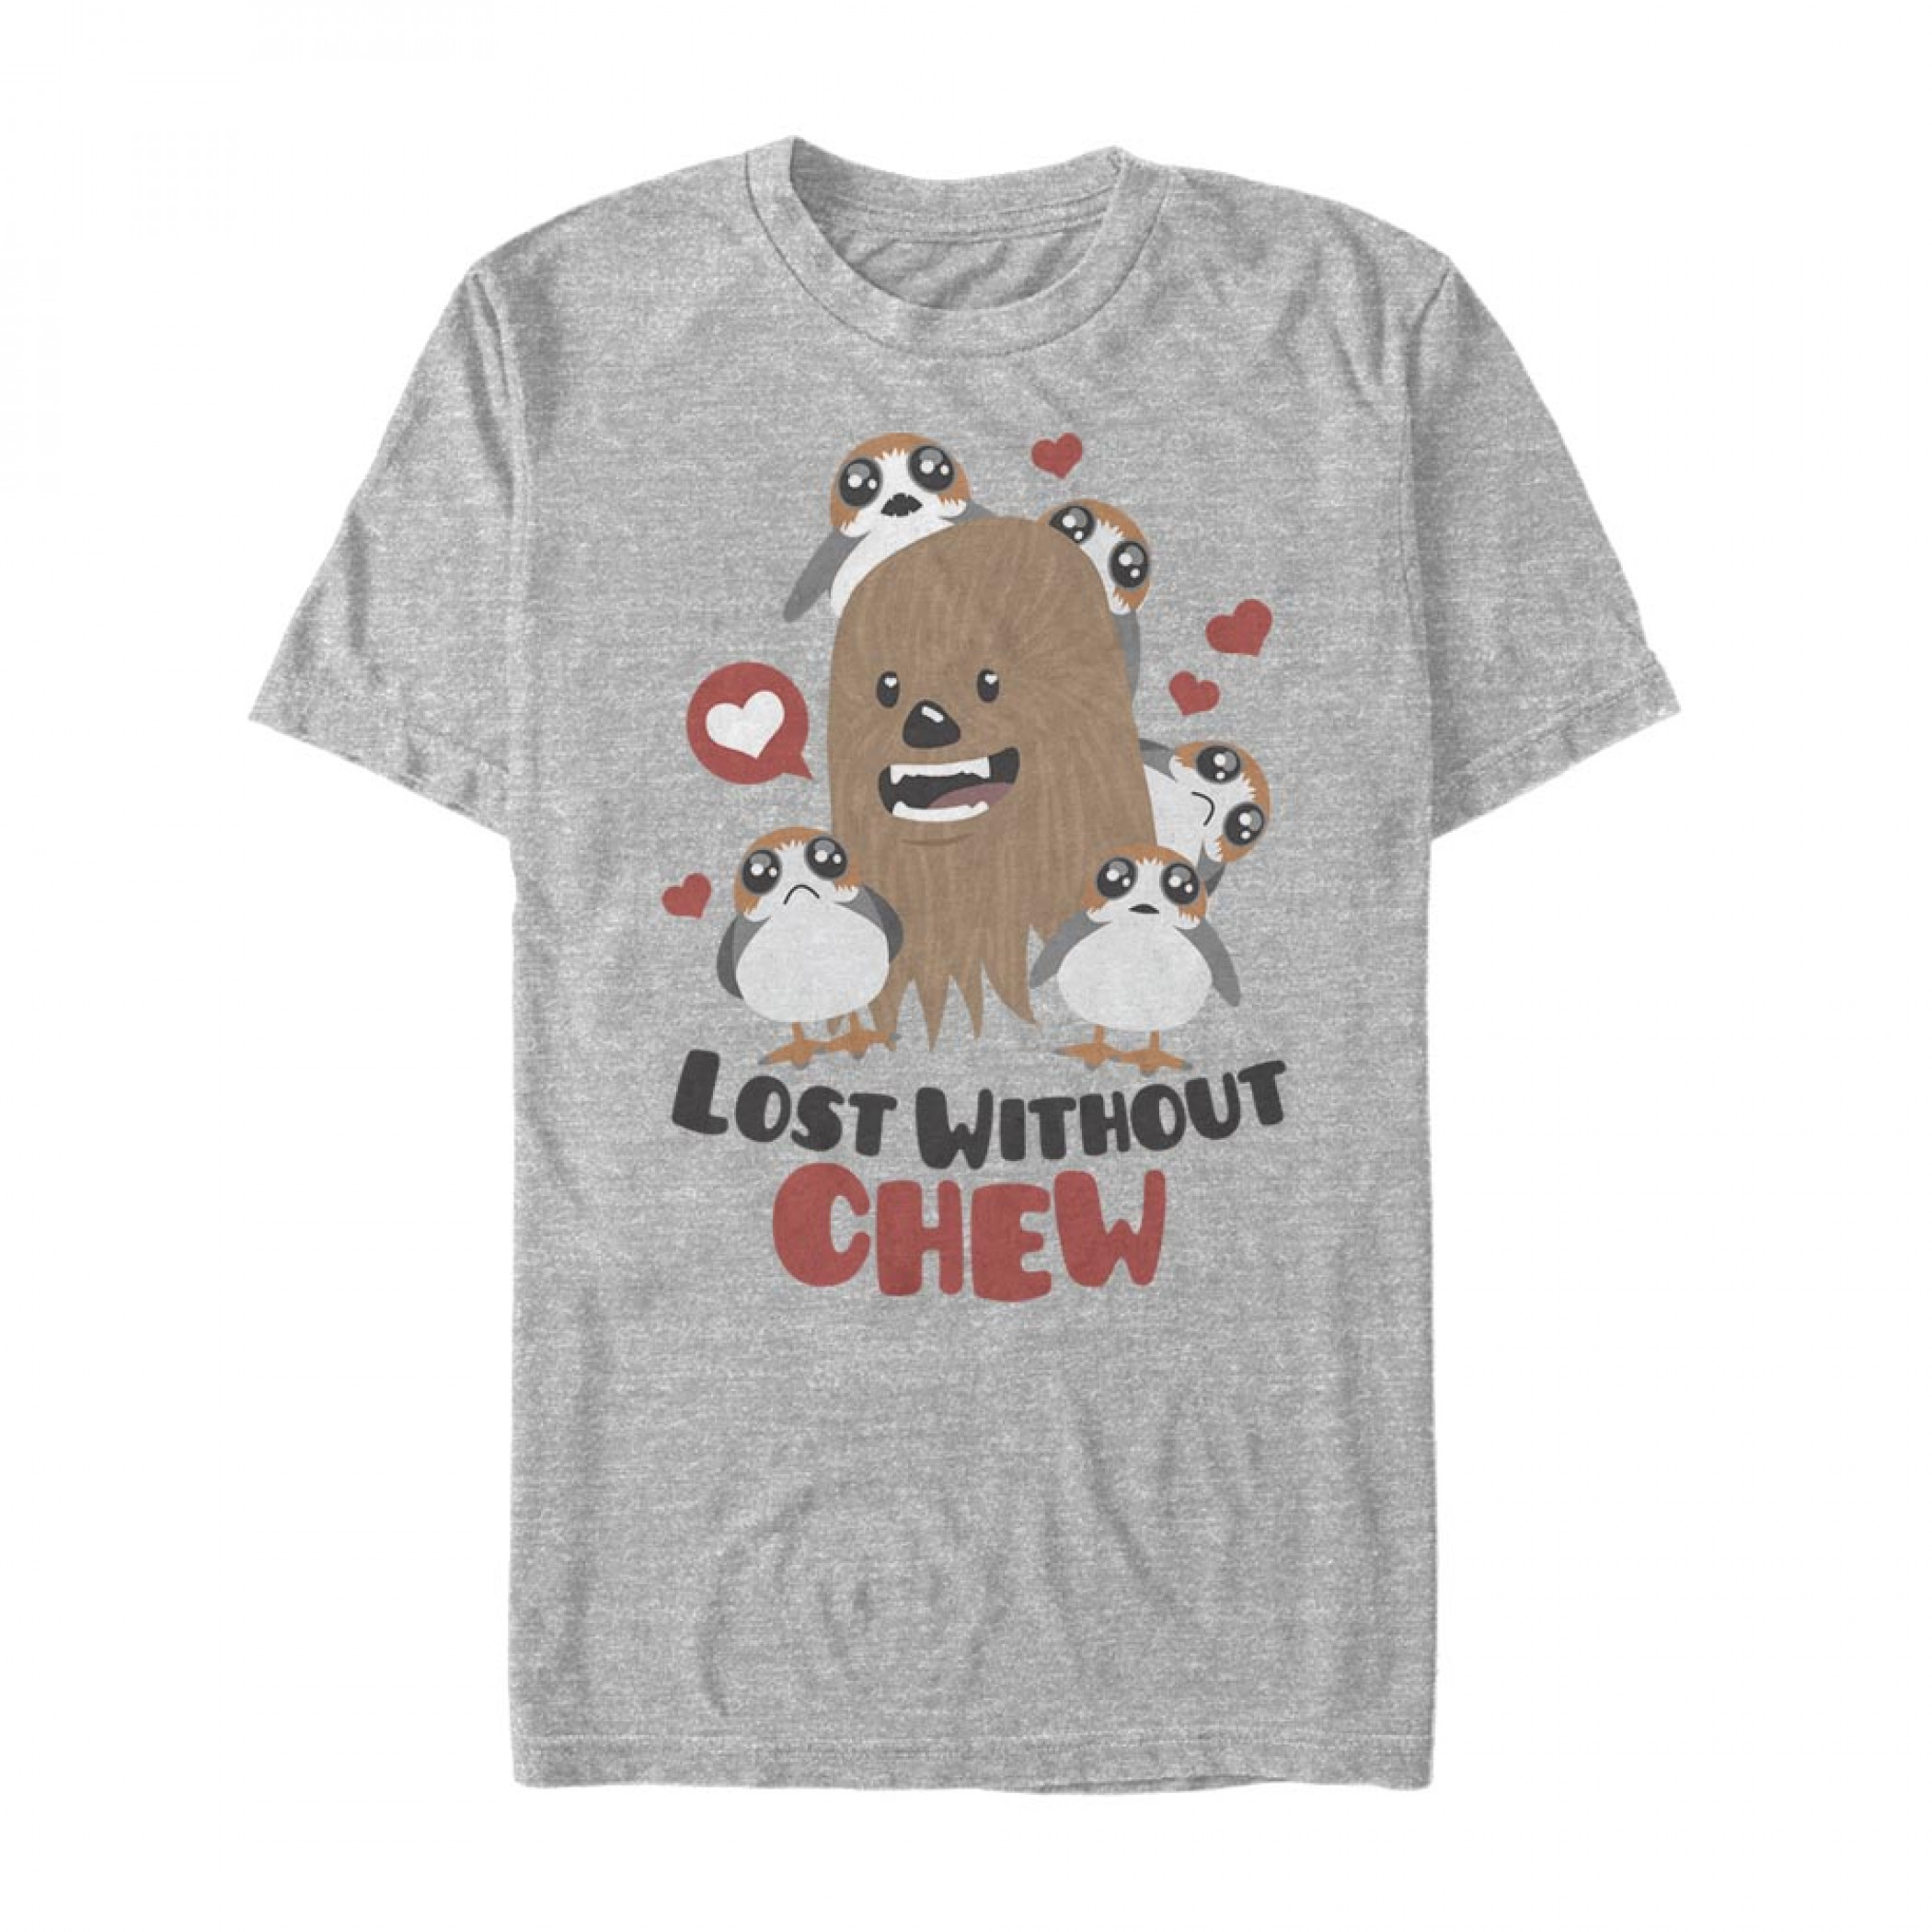 Star Wars Lost Without Chew Grey T-Shirt